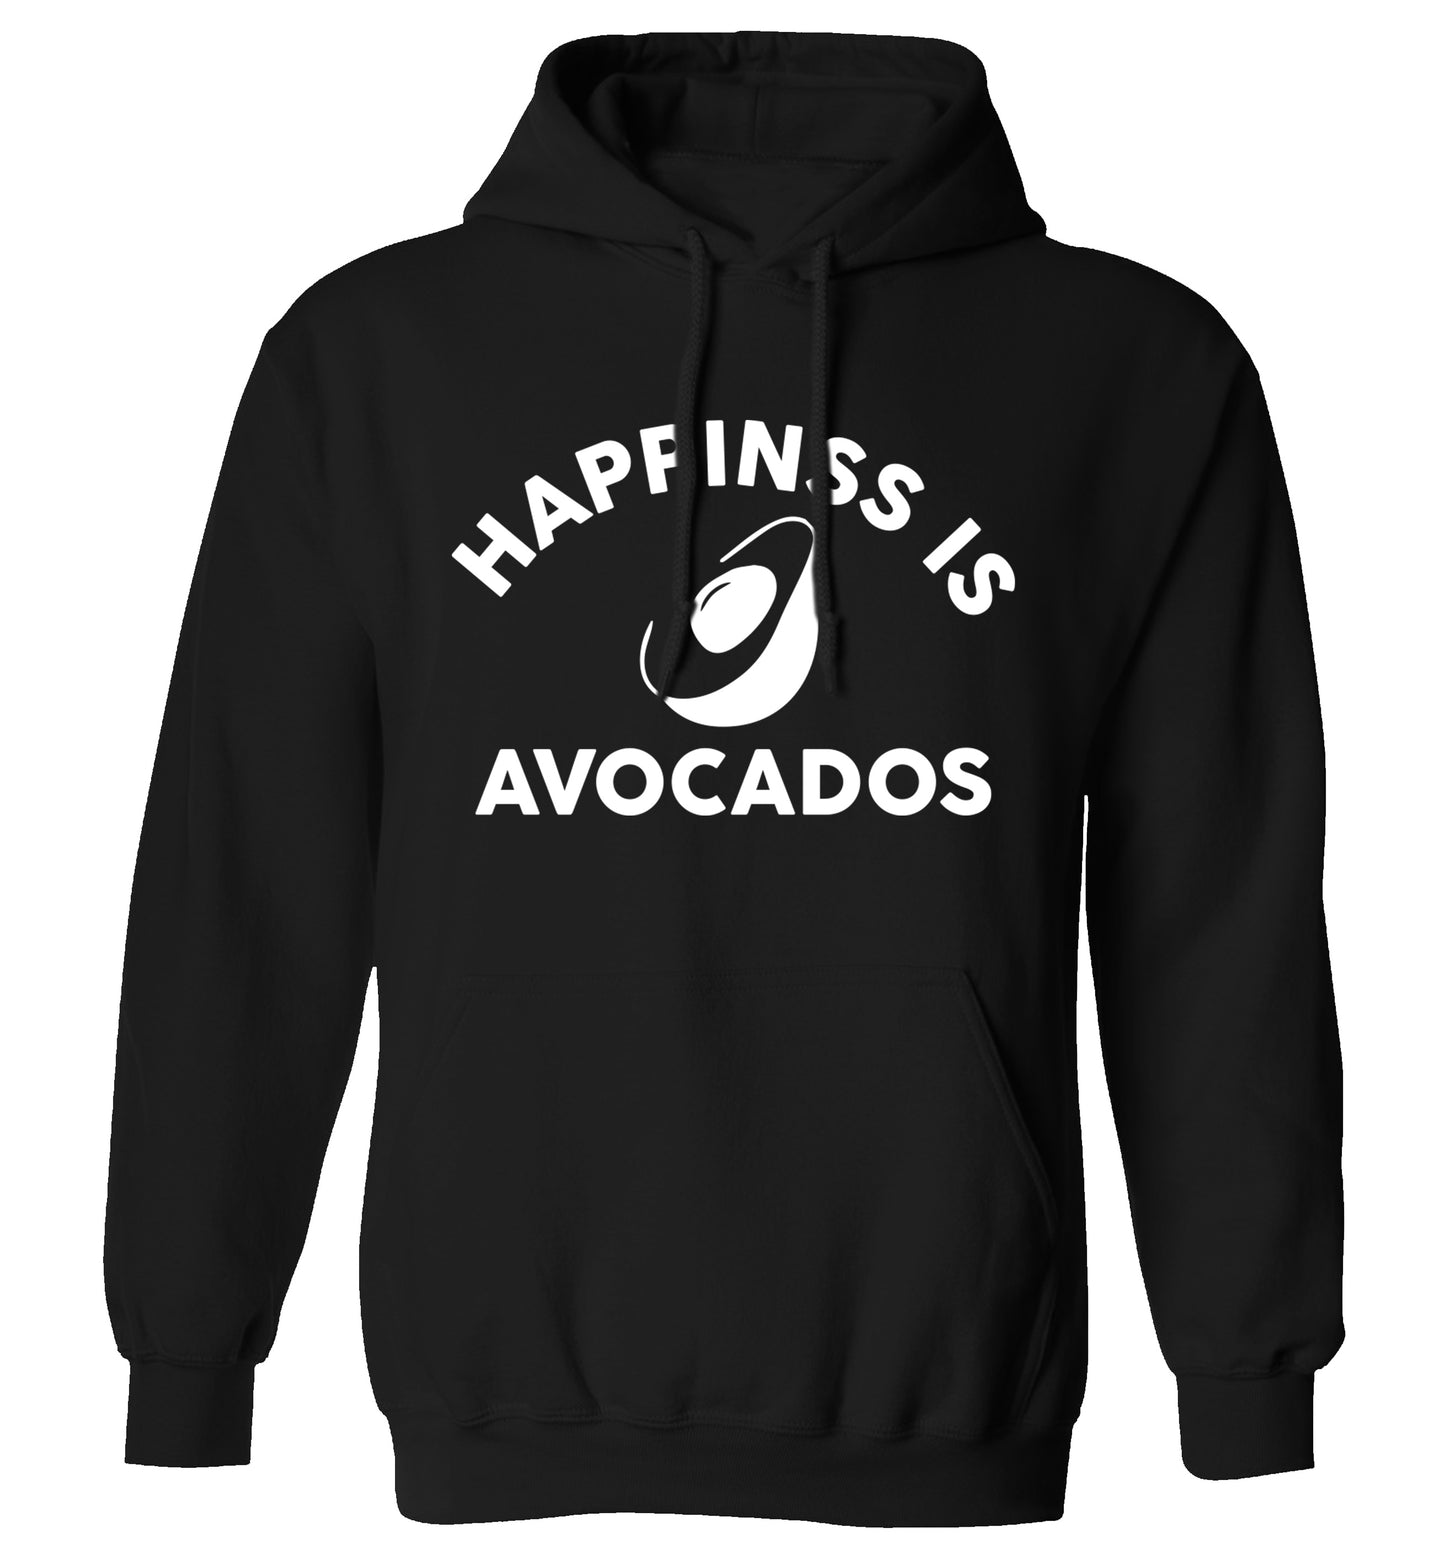 Happiness is avocados adults unisex black hoodie 2XL